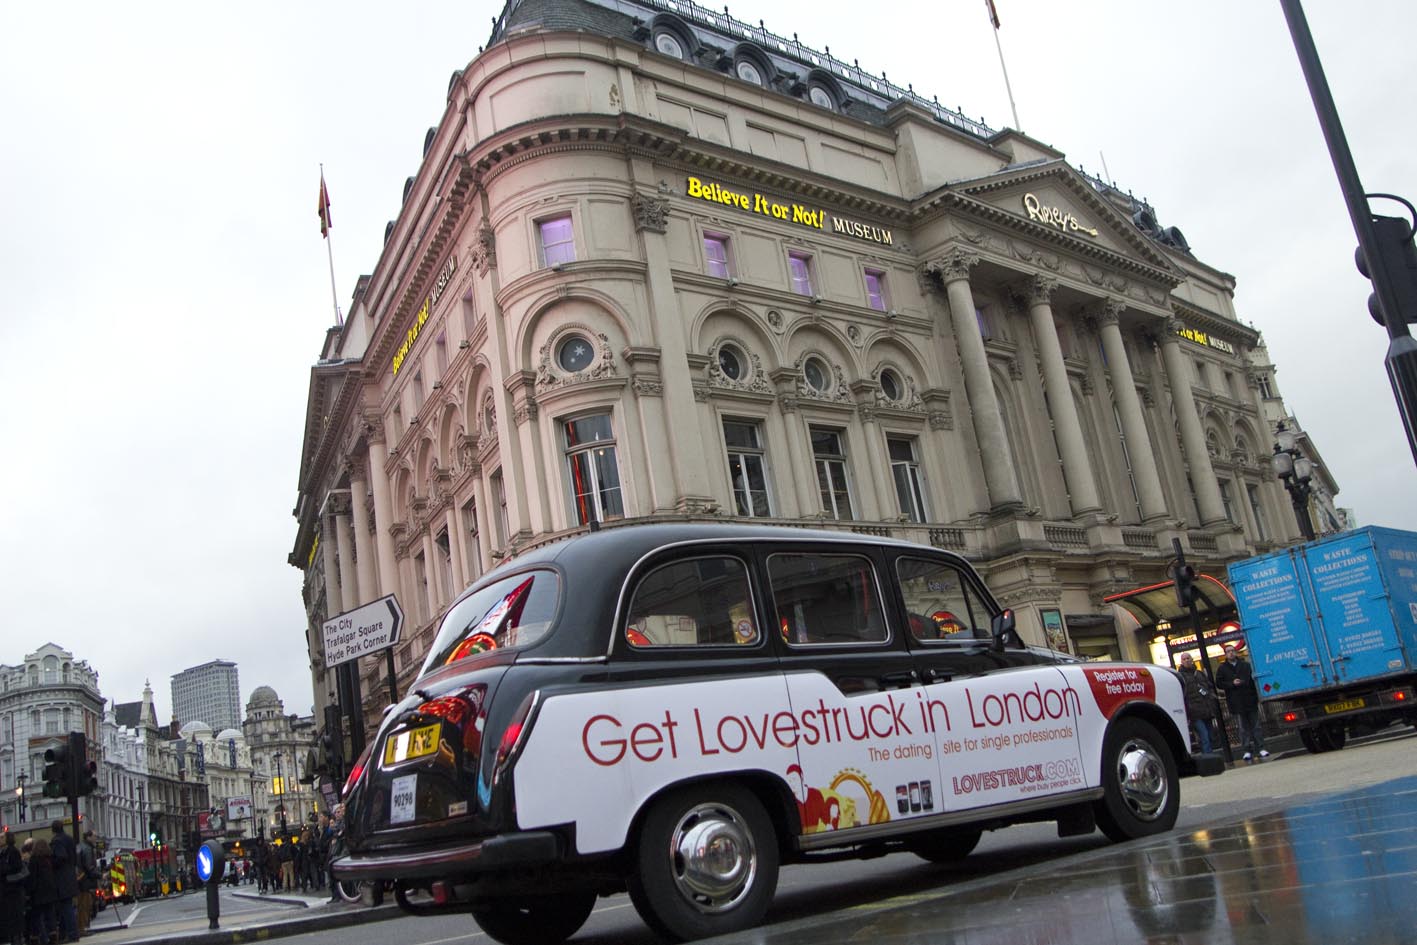 2012 Ubiquitous taxi advertising campaign for Lovestruck.com - Get Lovestruck in London